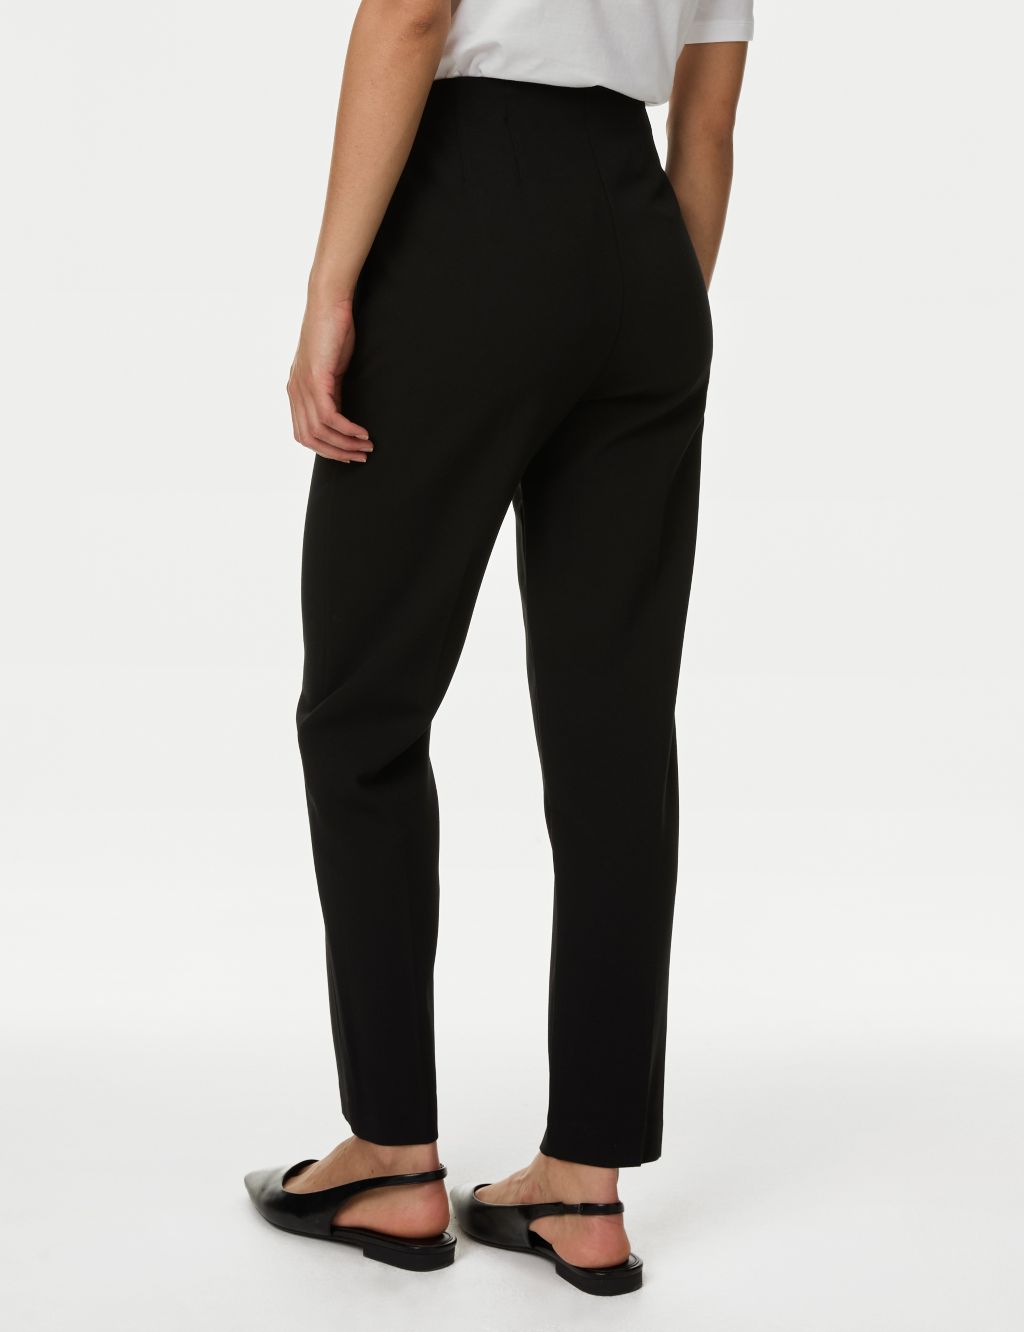 Tapered Ankle Grazer Trousers image 4